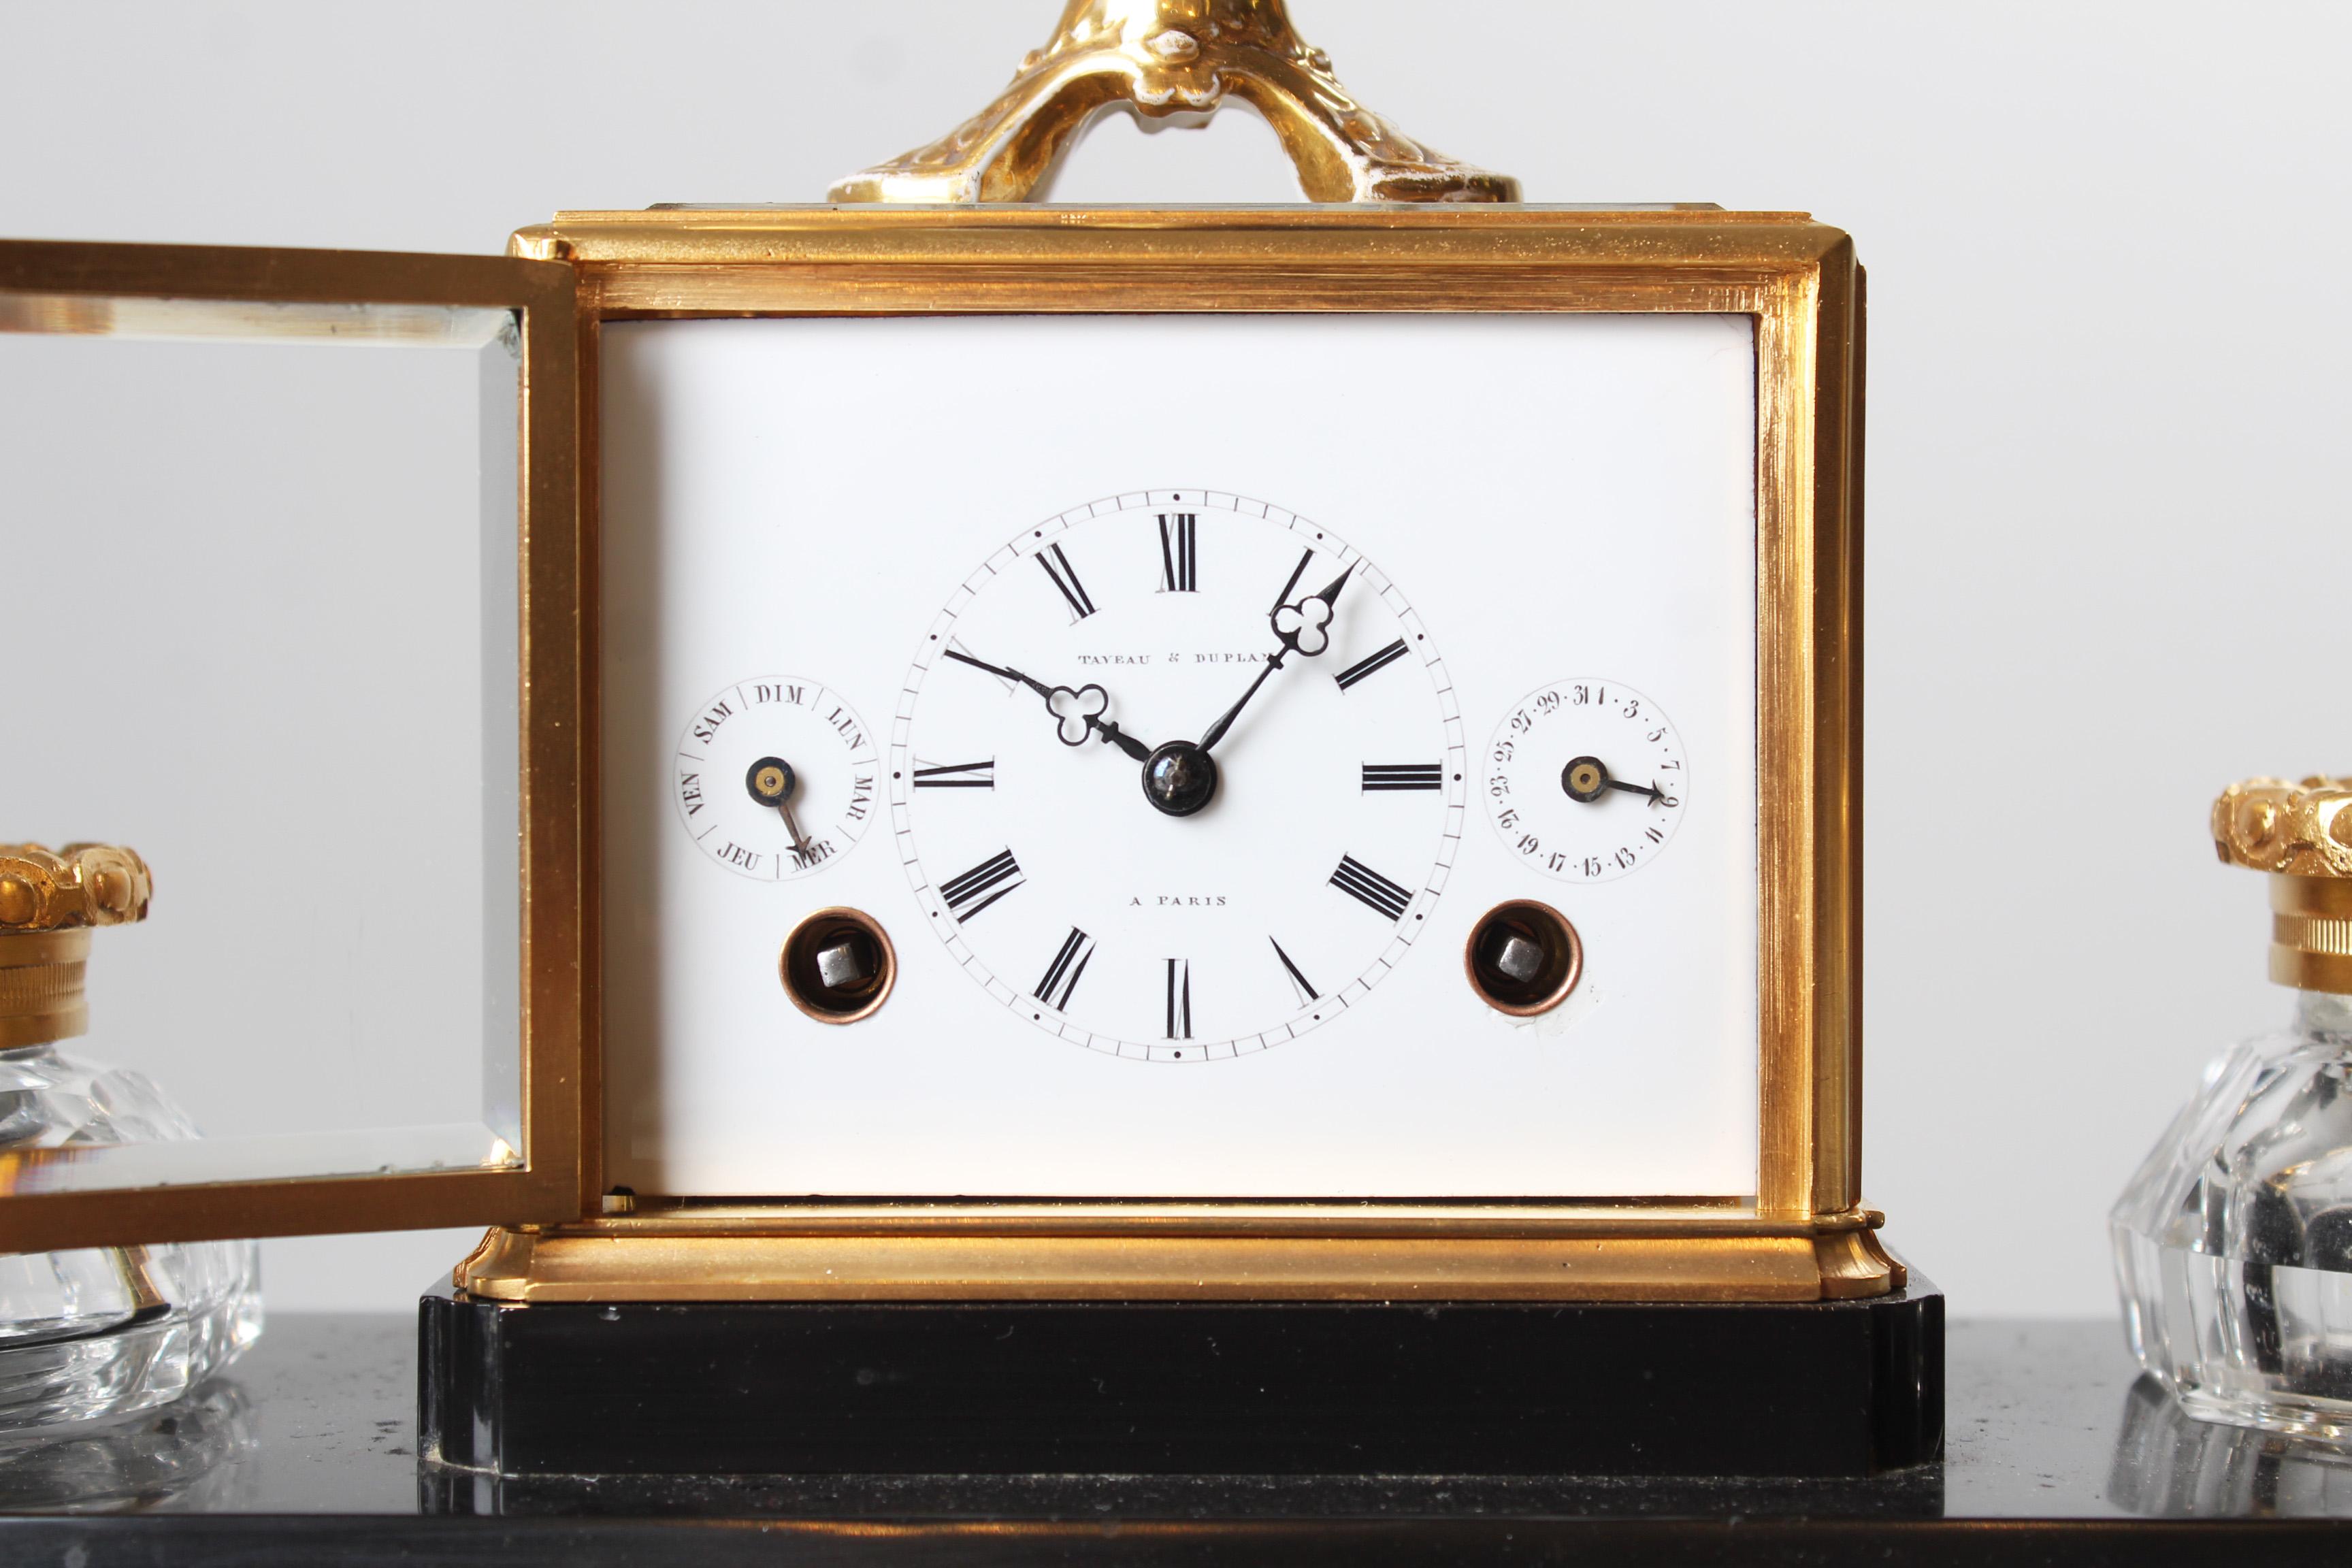 French Writing Set with Desk Clock, Carriage, Pendulette, Paris, Signed Moser, C. 1850